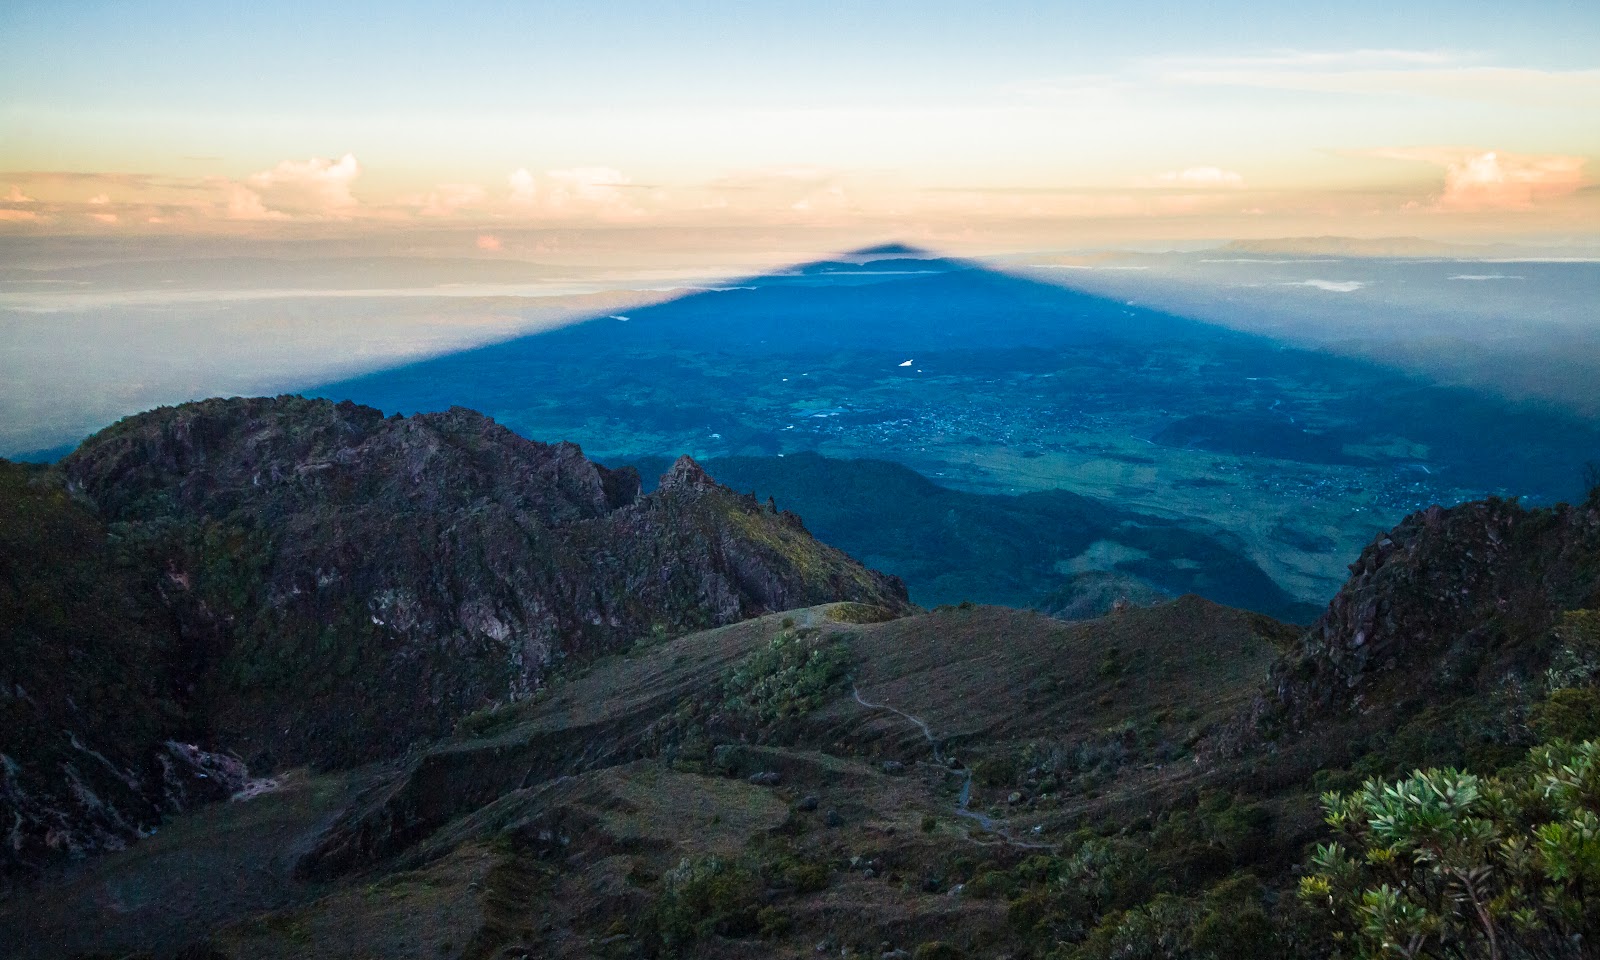 The Shadow Of Volcan Baru, Panama's Highest Point, Dominates The Landscape During Sunrise.